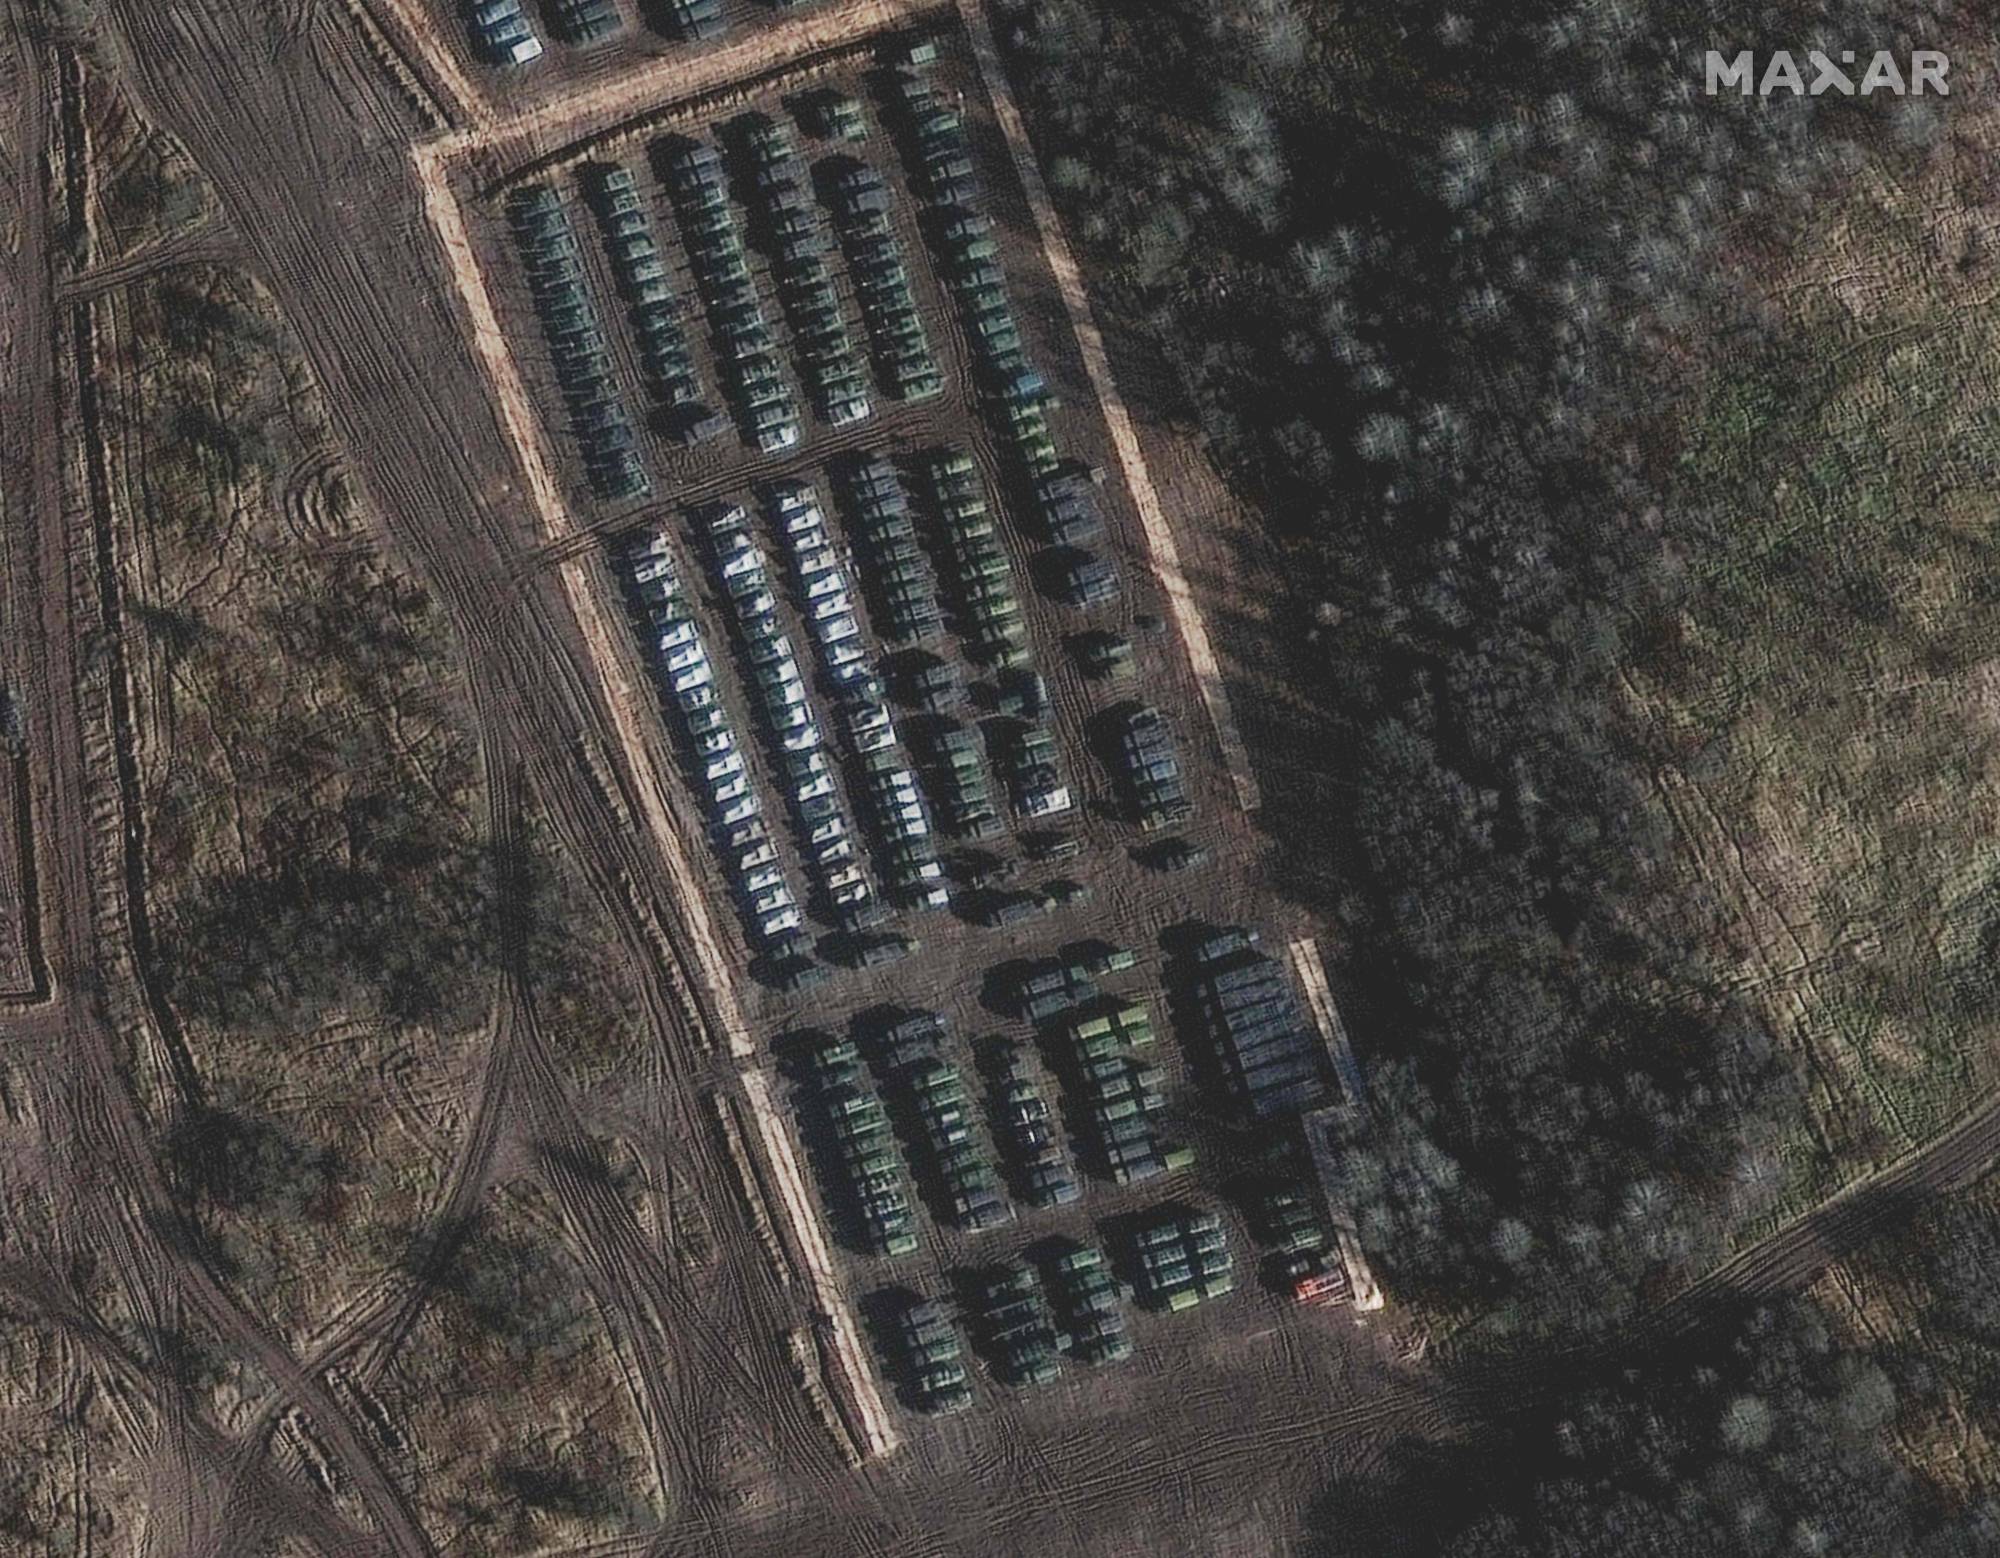 Russian military equipment on the northern edge of the town of Yelnya, Smolensk Oblast, Russia | SATELLITE IMAGE ©2021 MAXAR TECHNOLOGIES / VIA AFP-JIJI